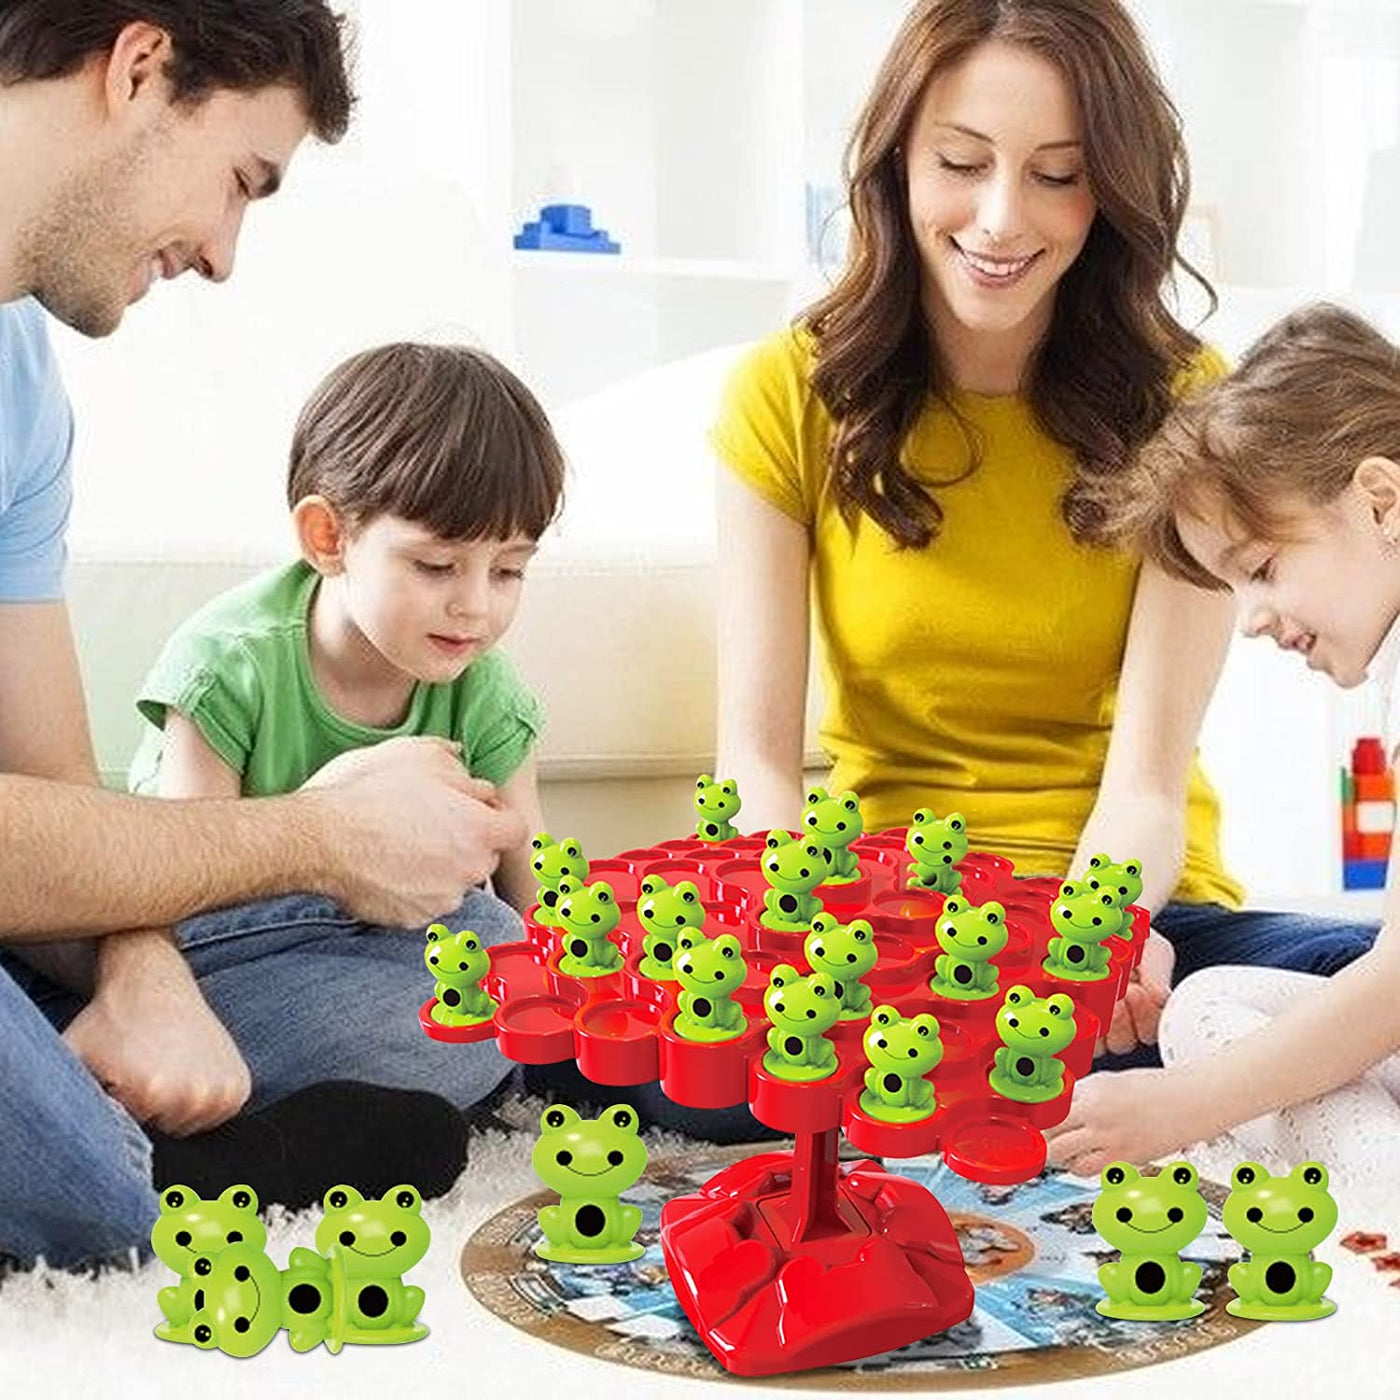 Balance Board Game for Kids Frog Toy